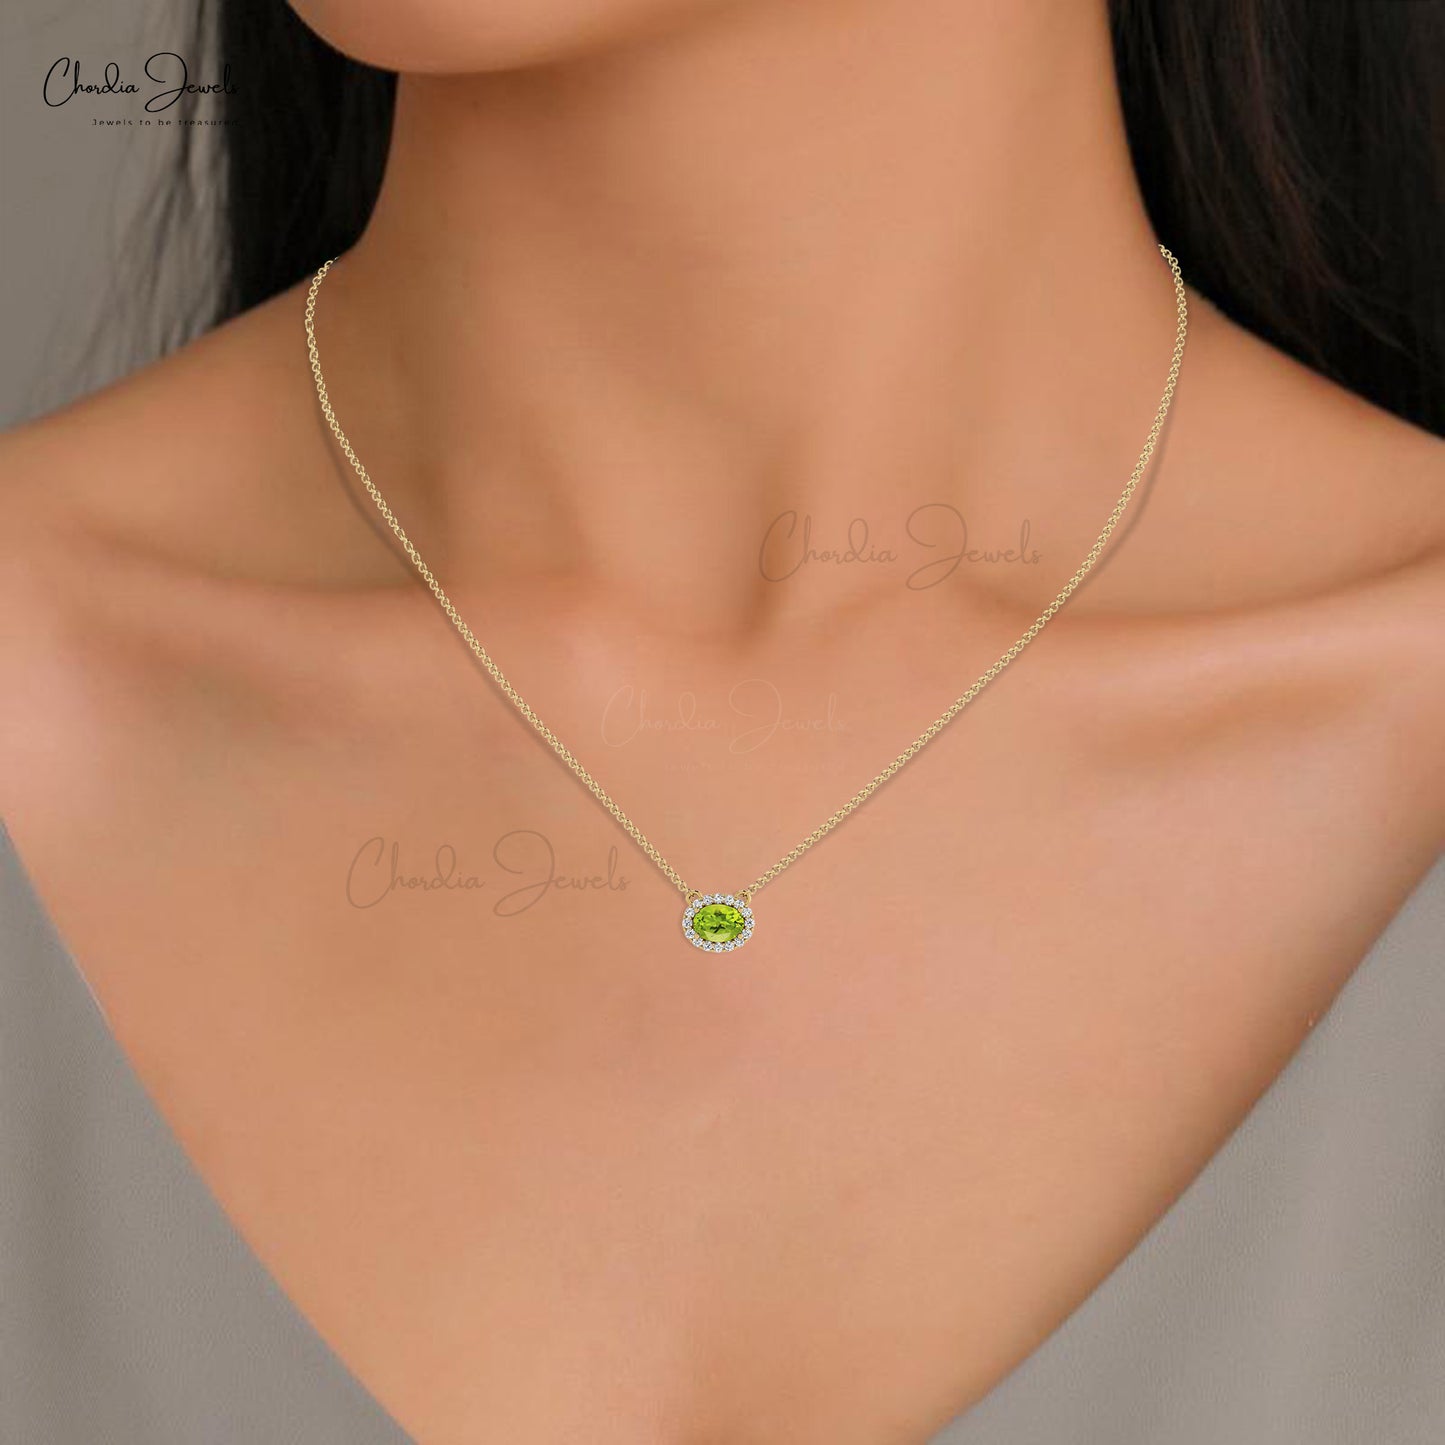 Natural Peridot and Diamond Necklace, 14k Solid Gold Necklace, 0.75 Carat Oval Faceted Gemstone Necklace, Bridesmaid Necklace for Gift